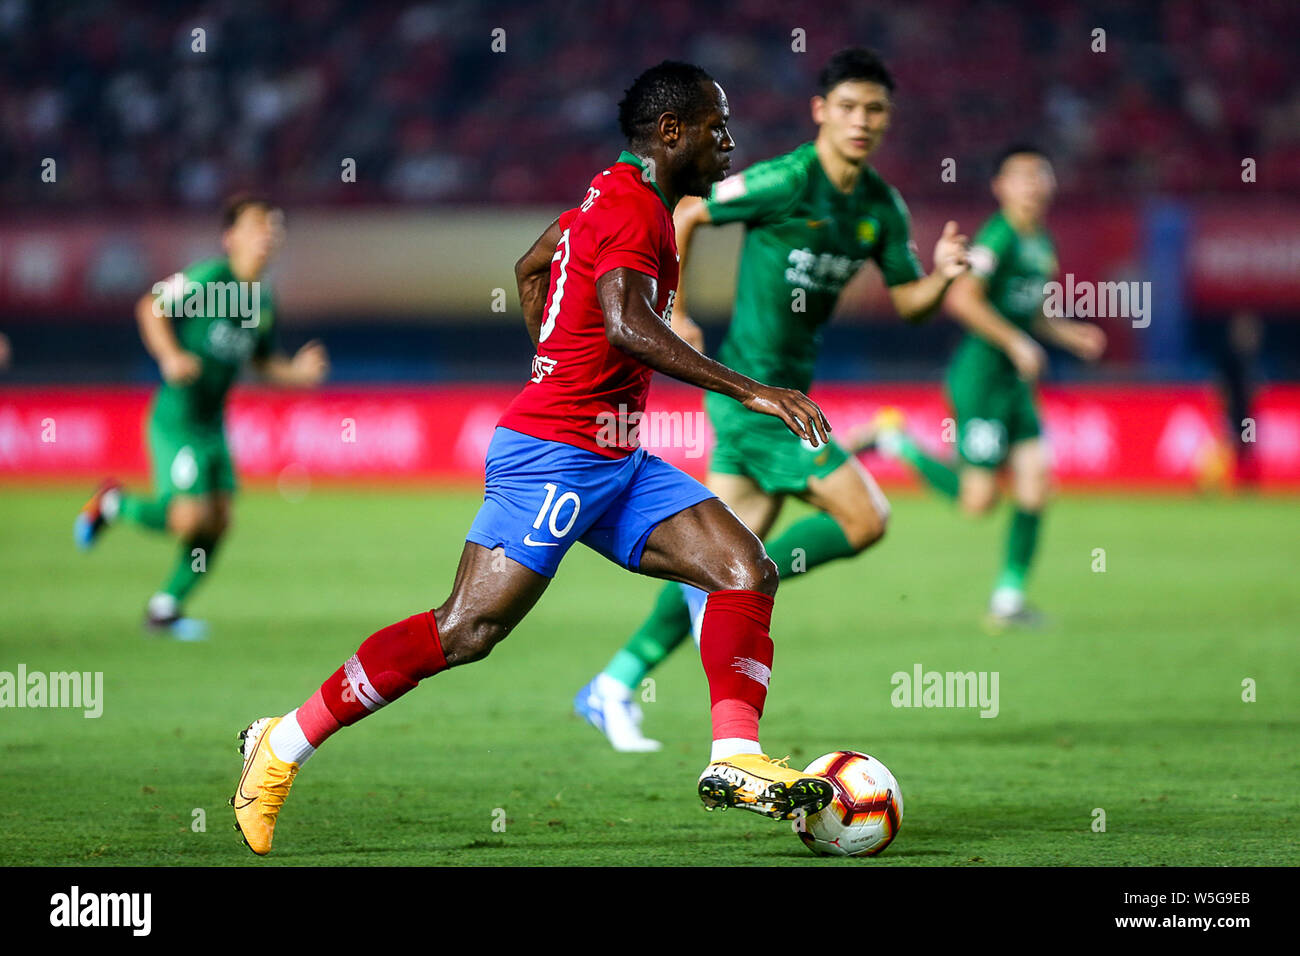 Cameroonian football player Christian Bassogog, of Henan Jianye dribbles against Beijing Sinobo Guoan in their 20th round match during the 2019 Chinese Football Association Super League (CSL) in Zhengzhou city, central China's Henan province, 27 July 2019. Henan Jianye defeated Beijing Sinobo Guoan 1-0. Stock Photo